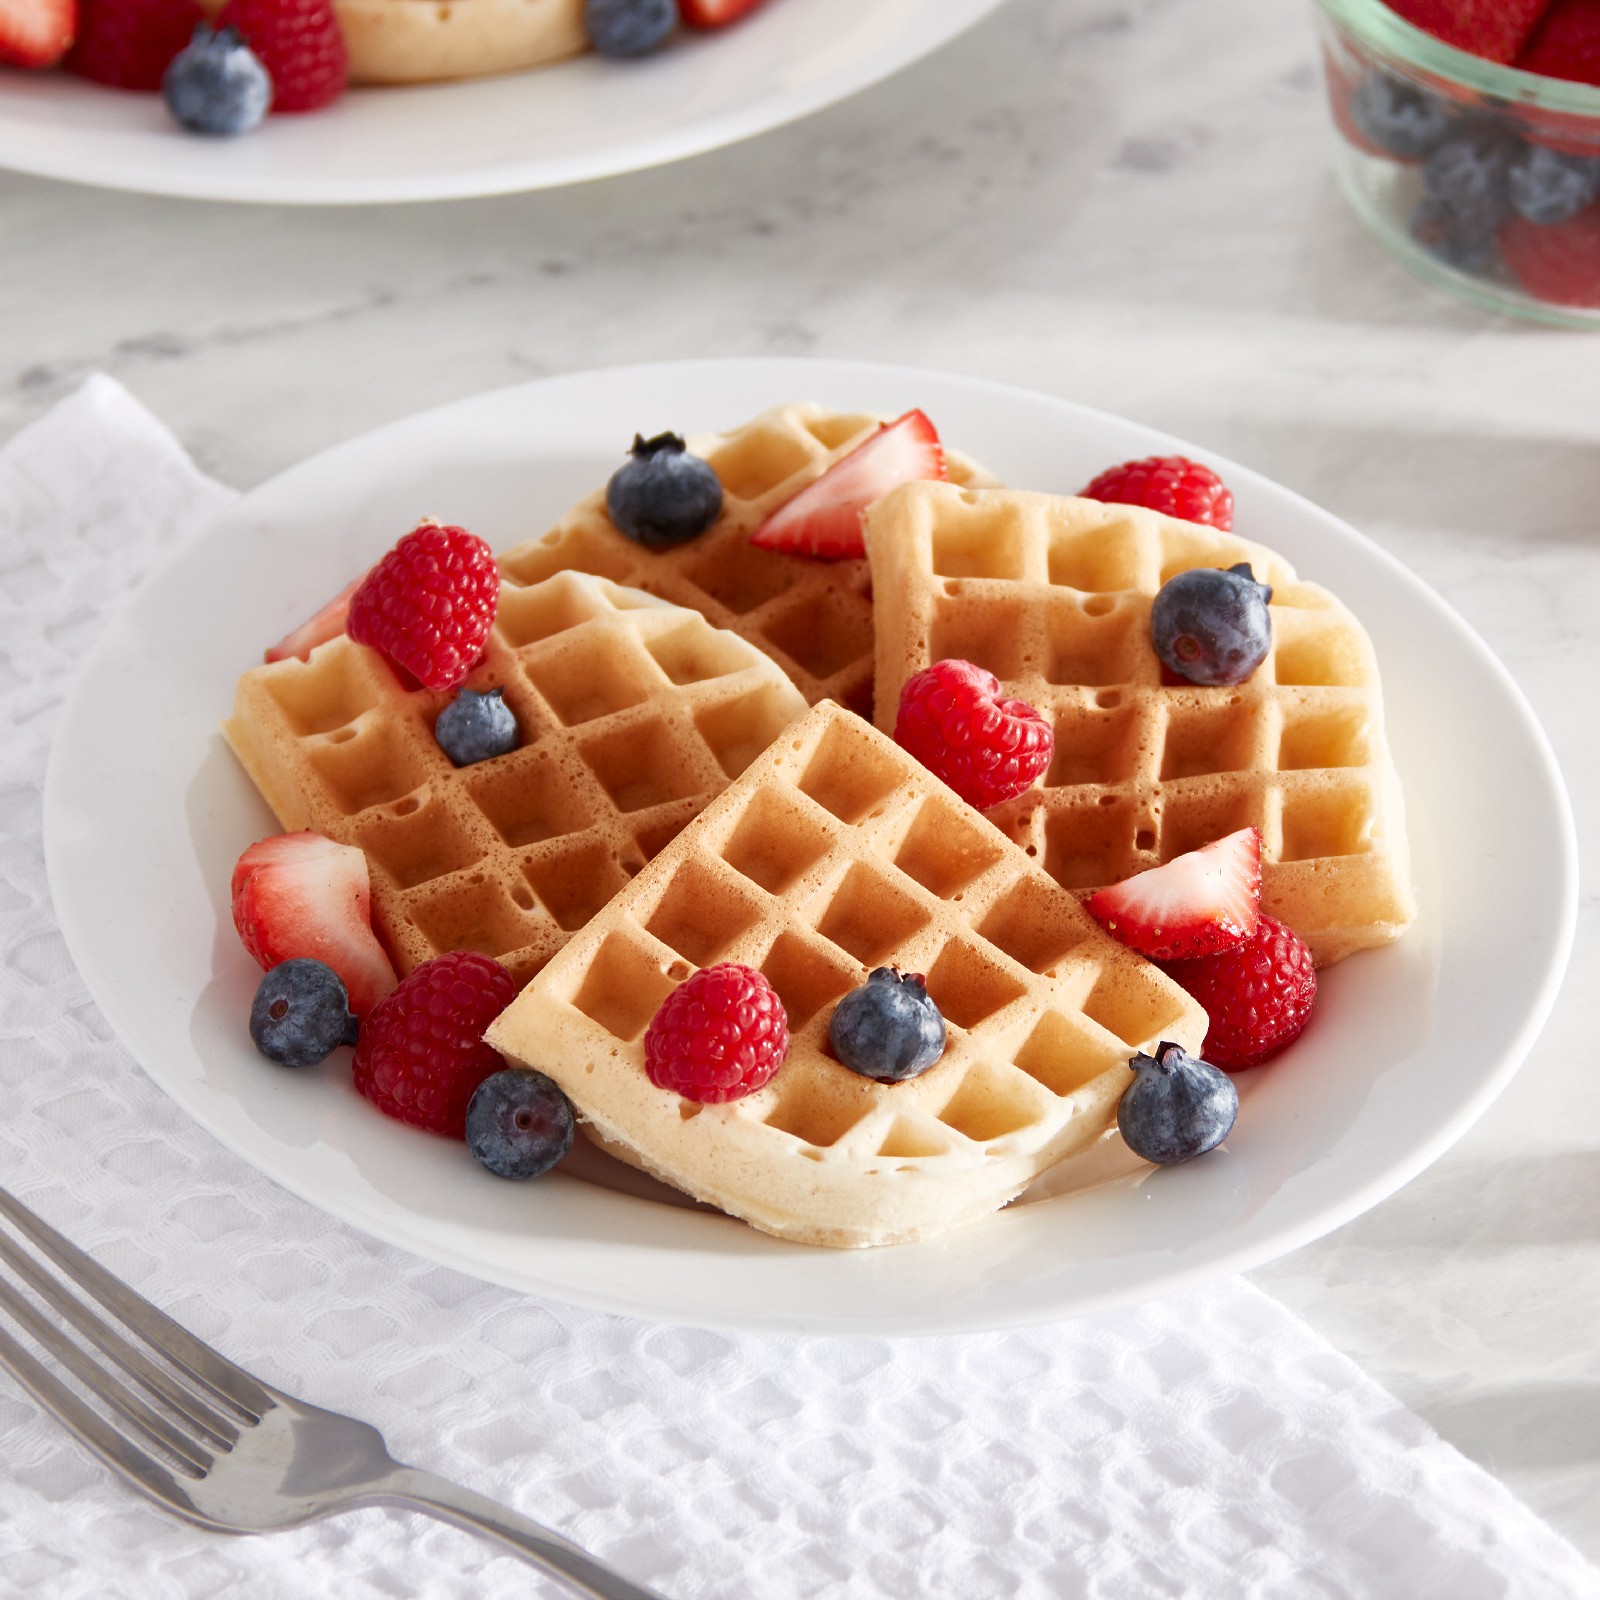 How to Make Classic Waffles in the Waffle Maker